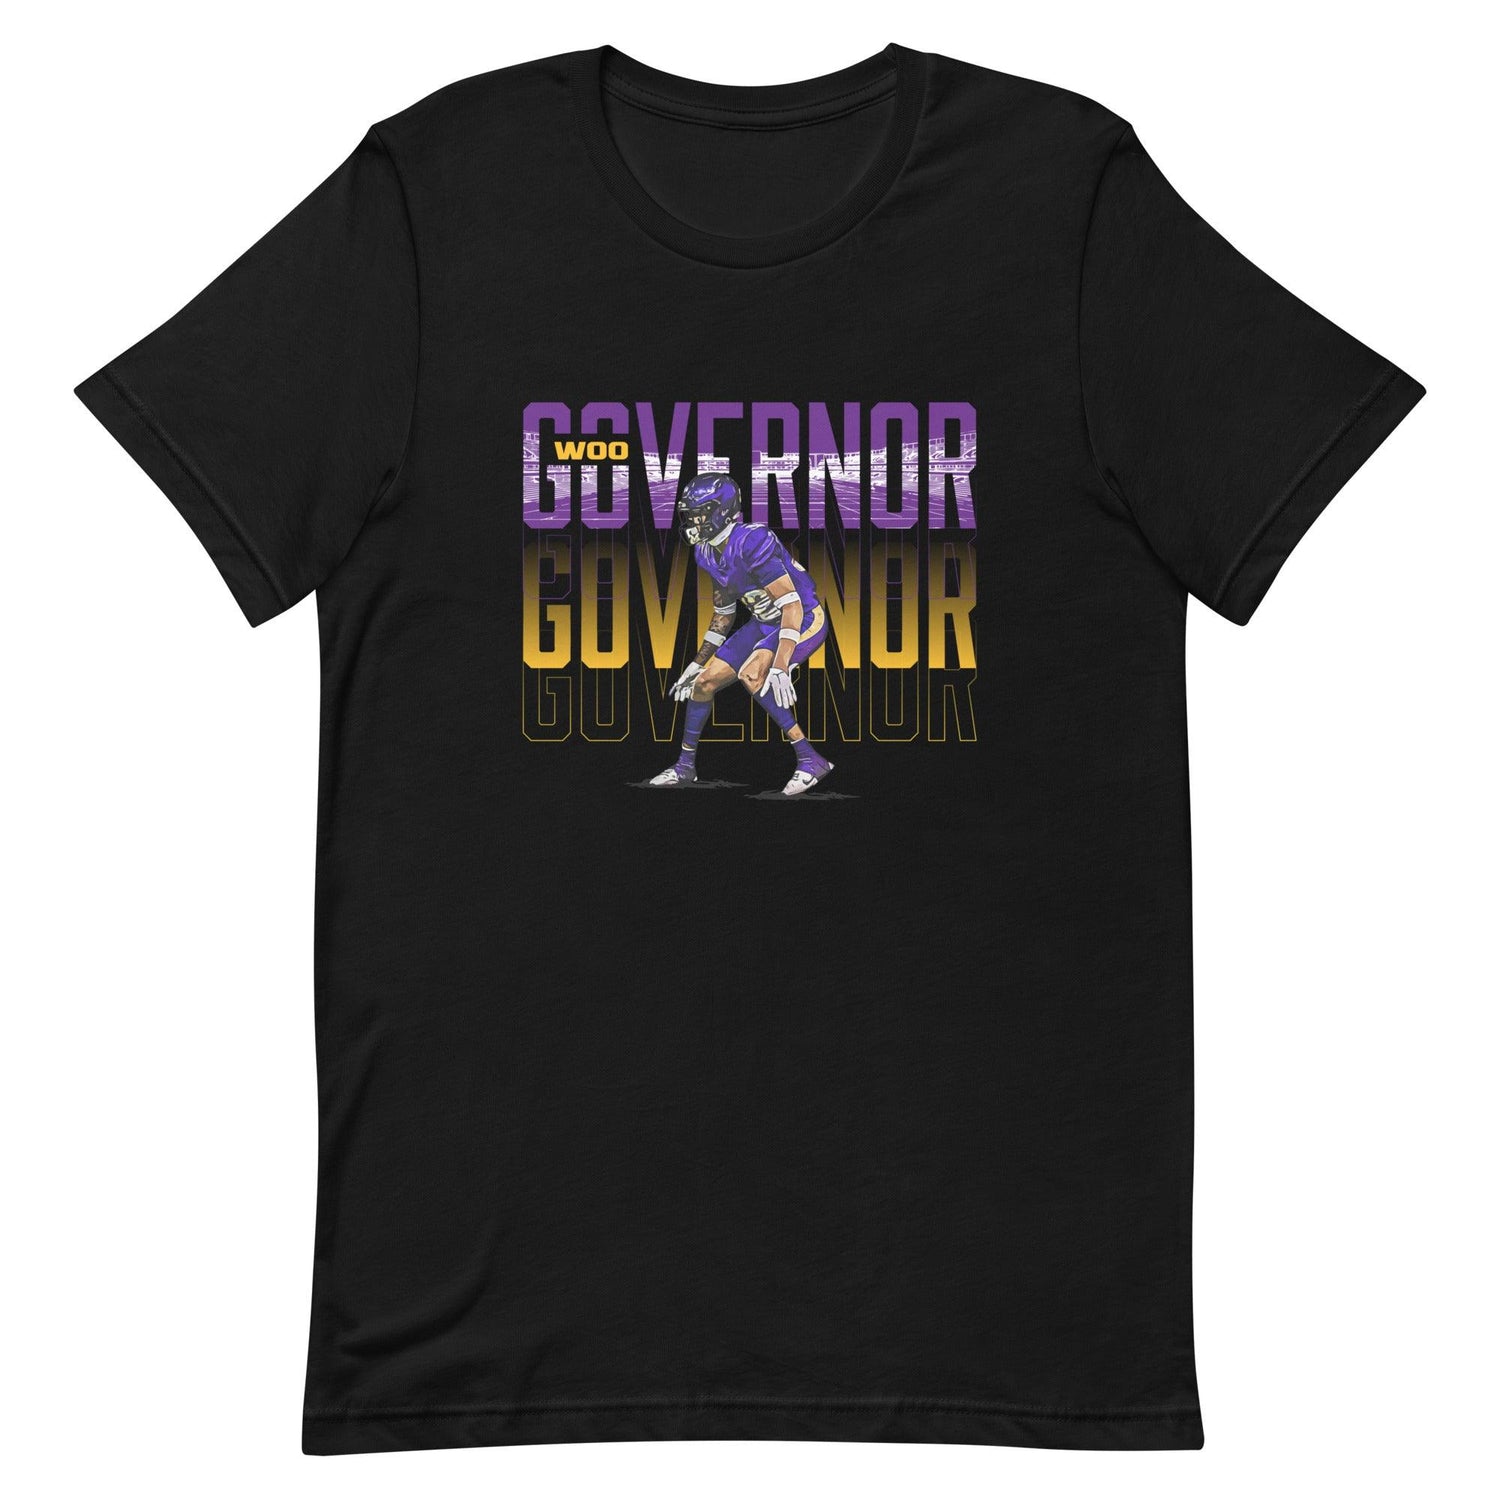 Woo Governor "Gameday" t-shirt - Fan Arch